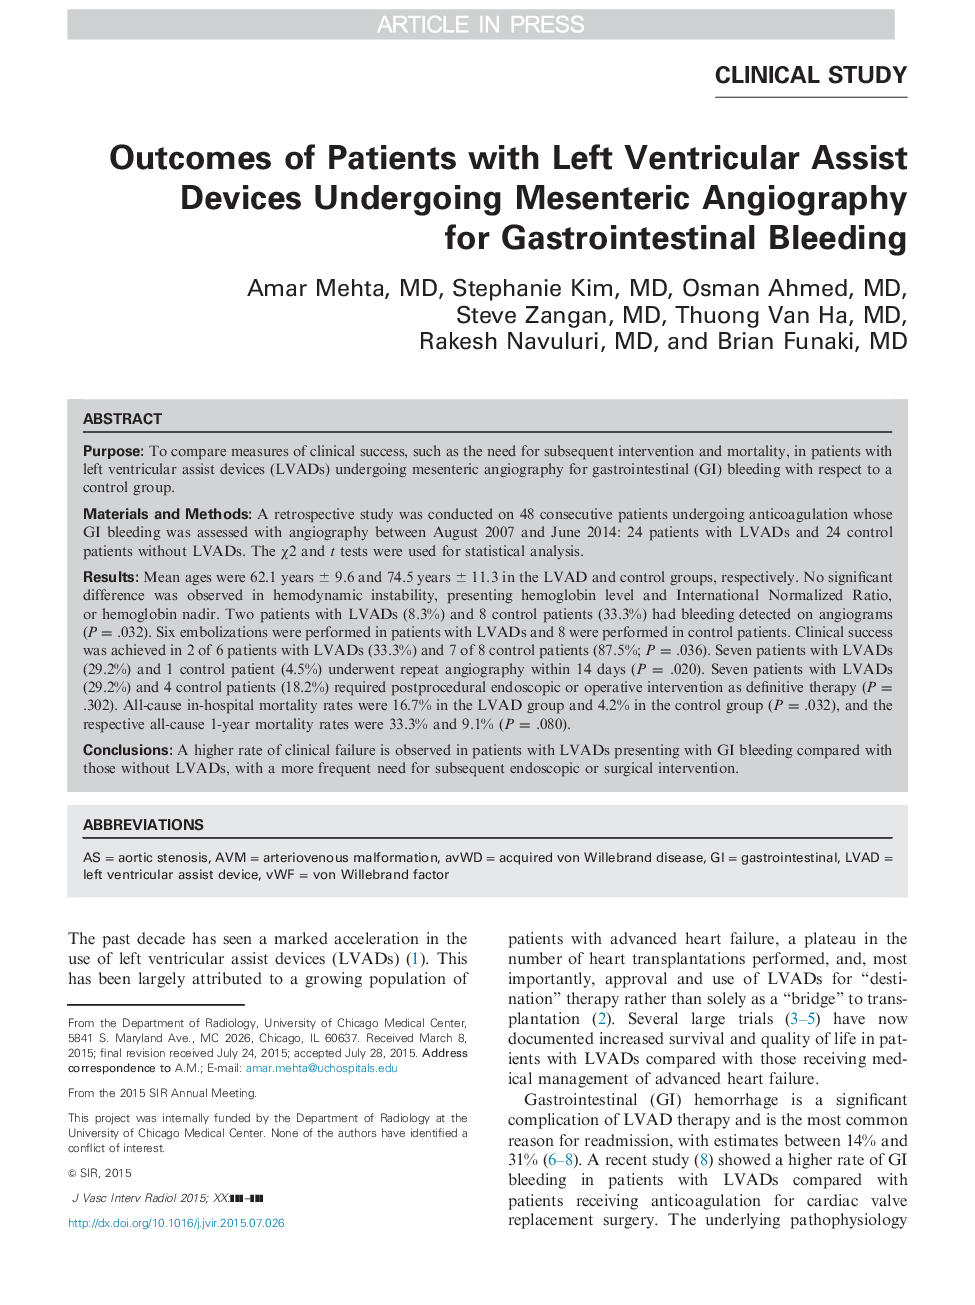 Outcomes of Patients with Left Ventricular Assist Devices Undergoing Mesenteric Angiography for Gastrointestinal Bleeding